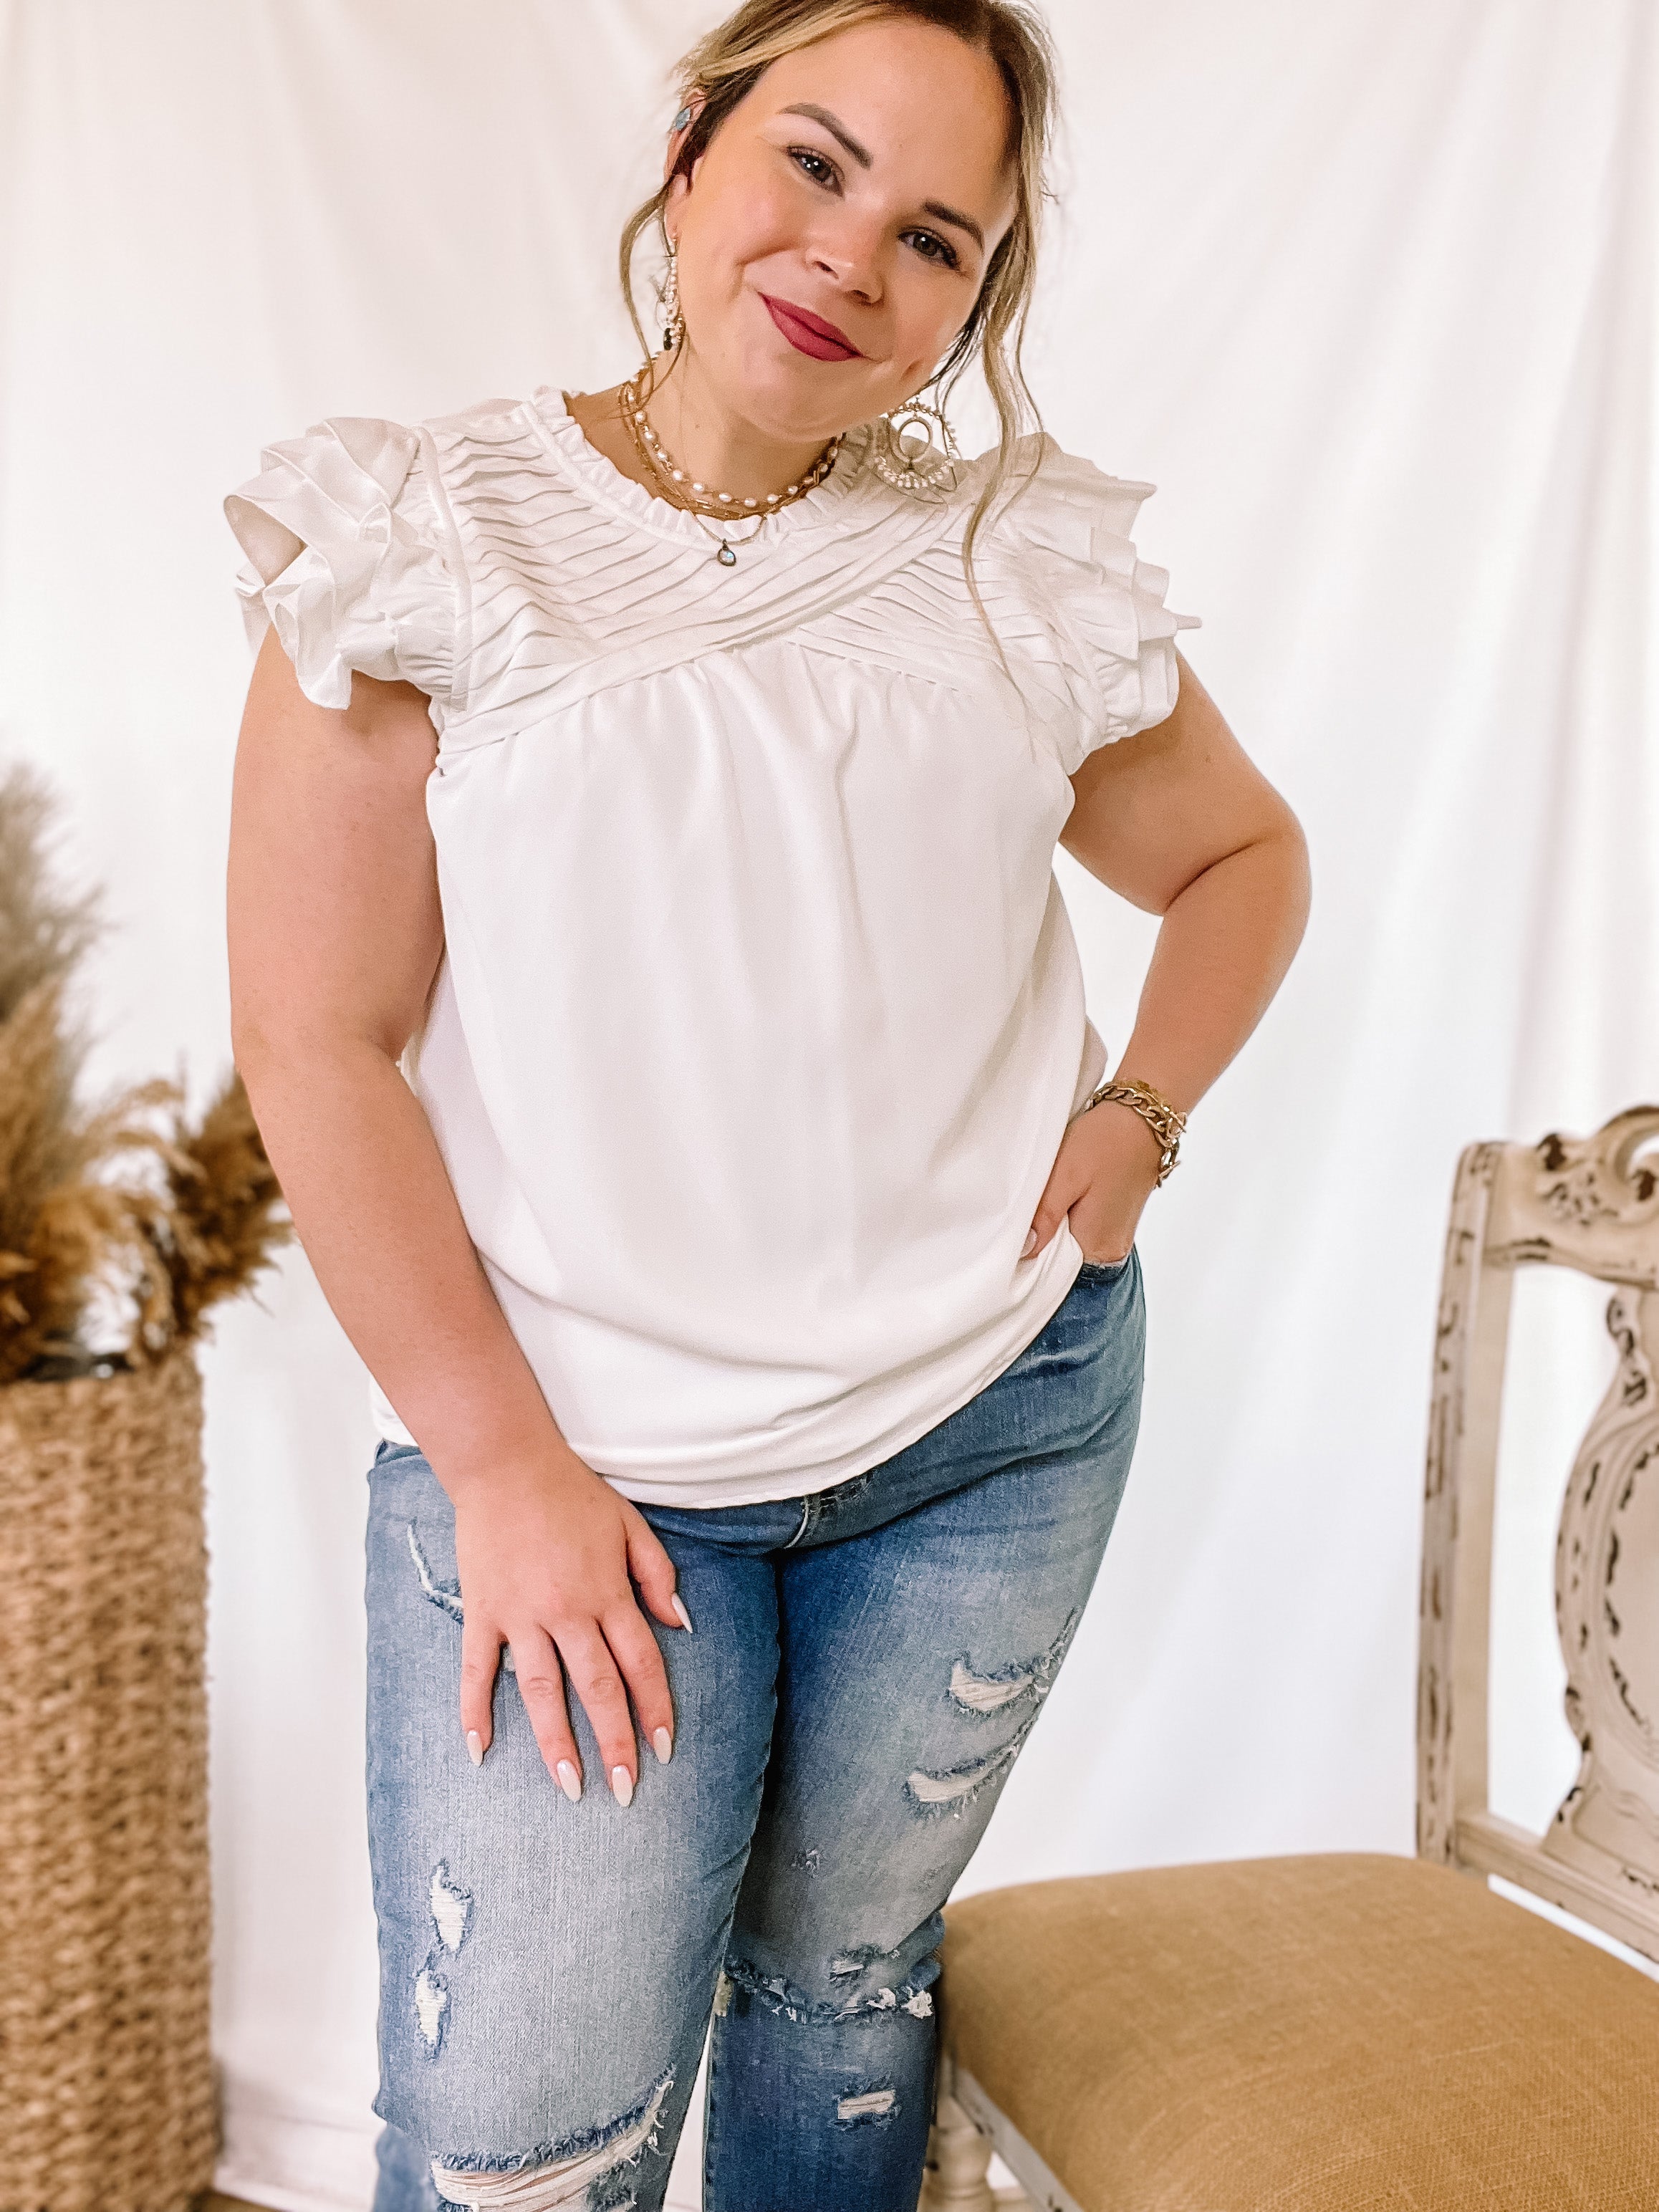 Expect The Best Pleated Upper Blouse with Ruffle Cap Sleeves in White - Giddy Up Glamour Boutique